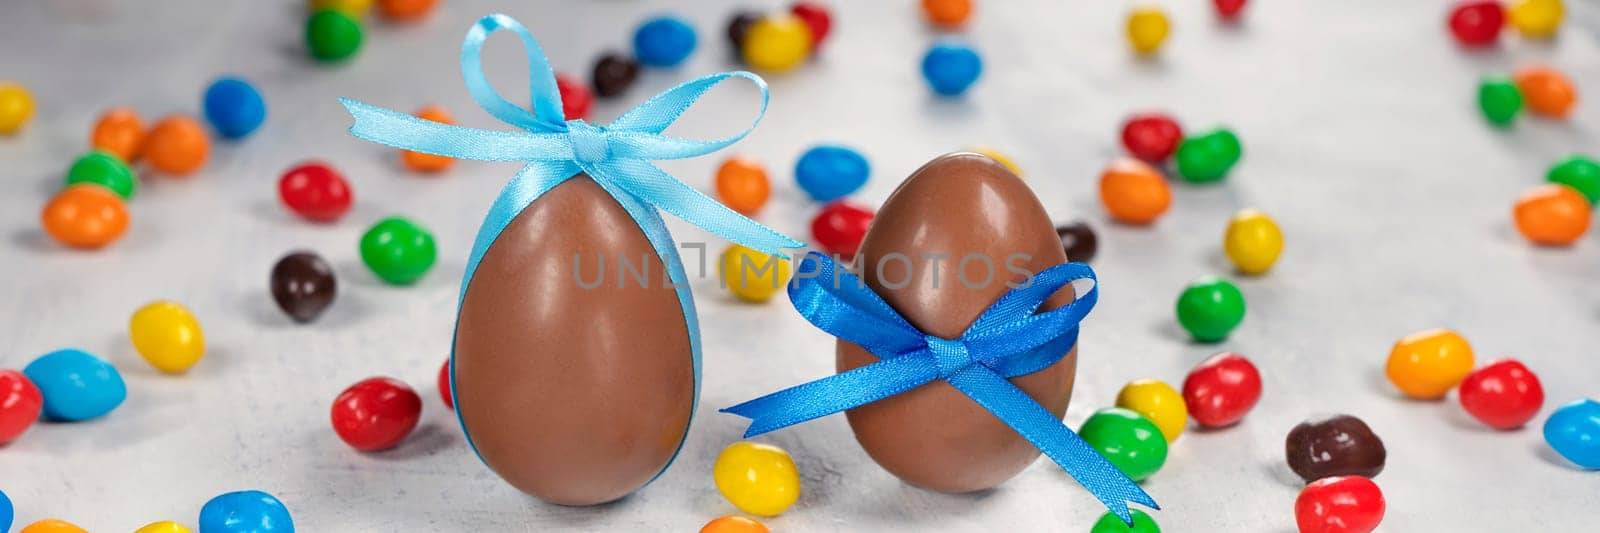 banner of Two big chocolate eggs with a blue bow on a white concrete background with colorful little eggs. by Leoschka